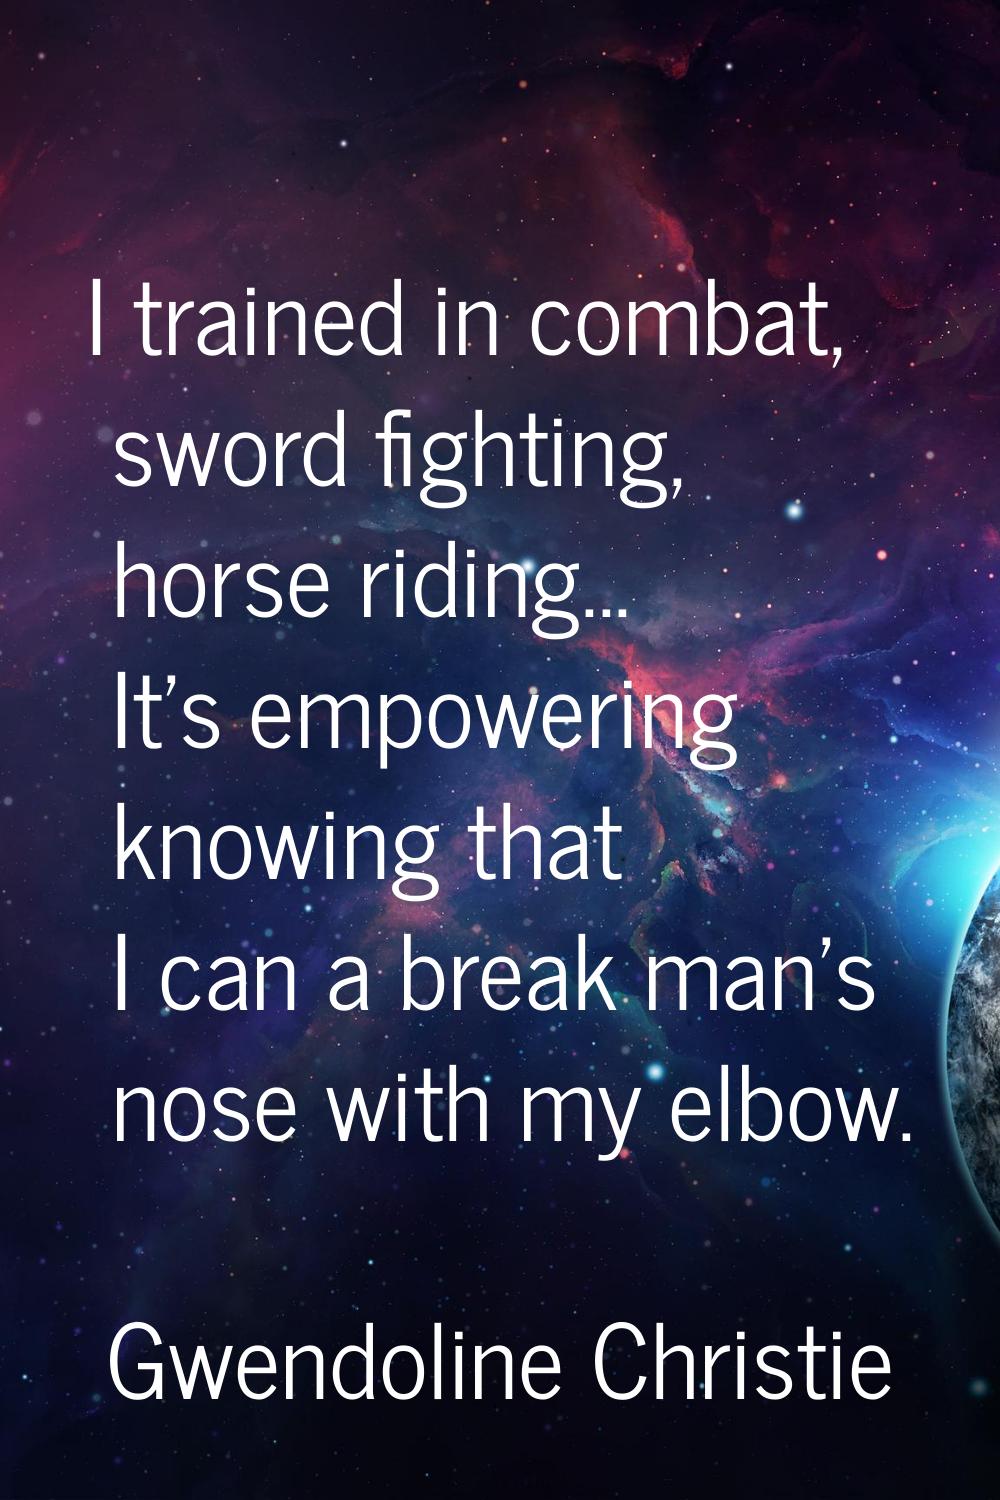 I trained in combat, sword fighting, horse riding... It's empowering knowing that I can a break man